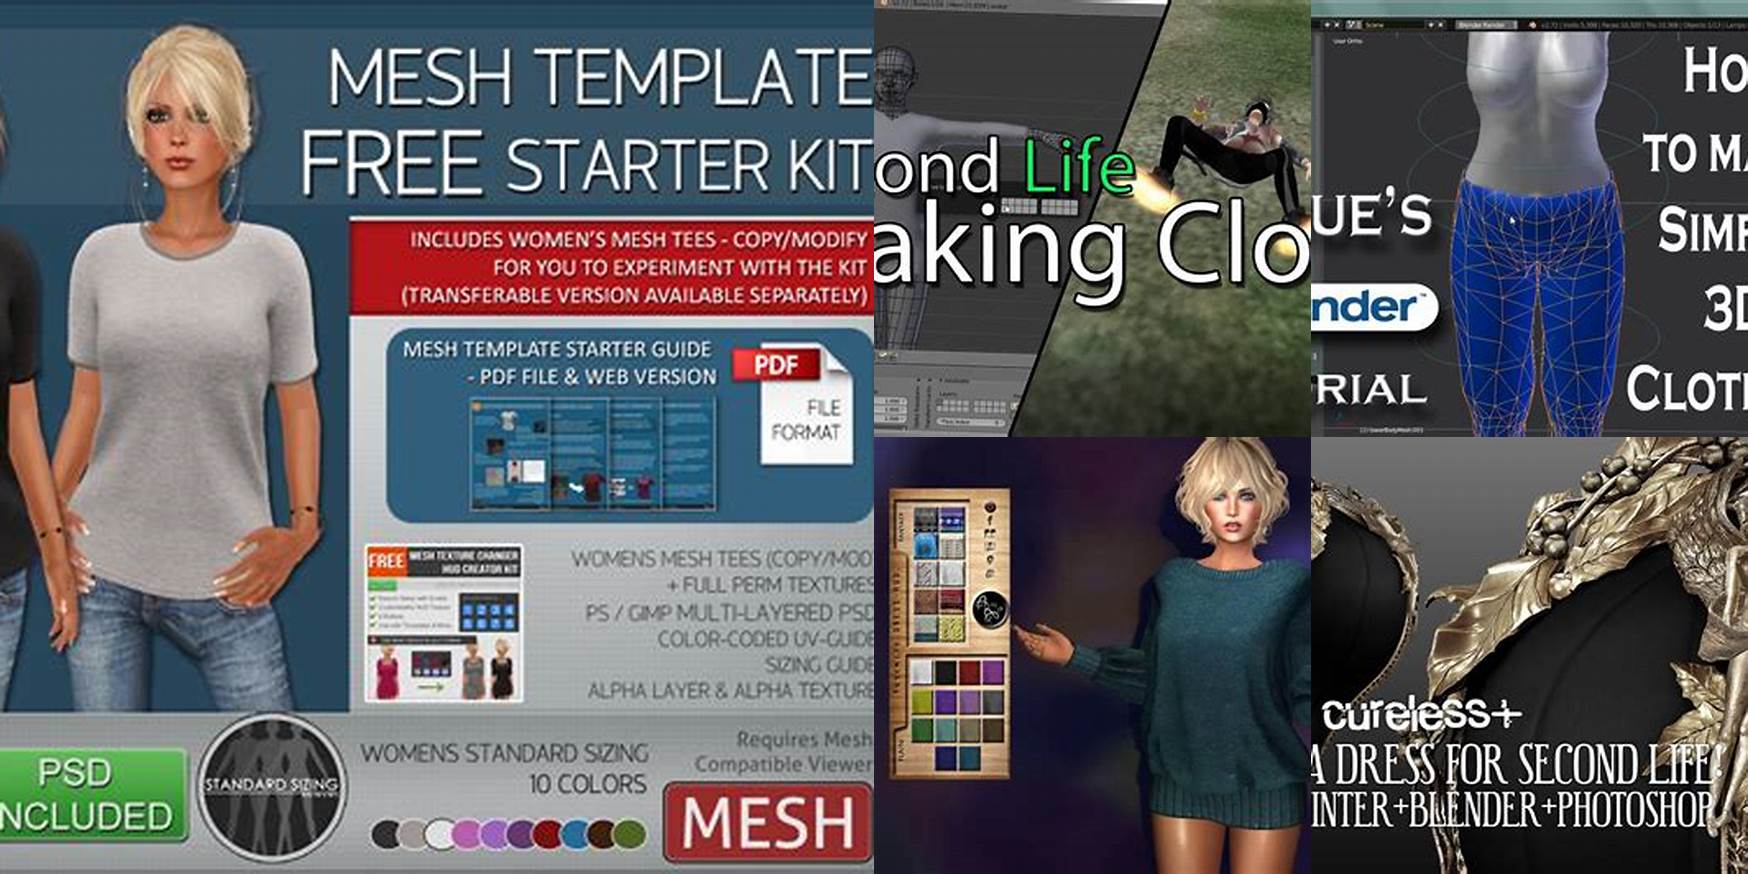 How To Make Clothing In Second Life